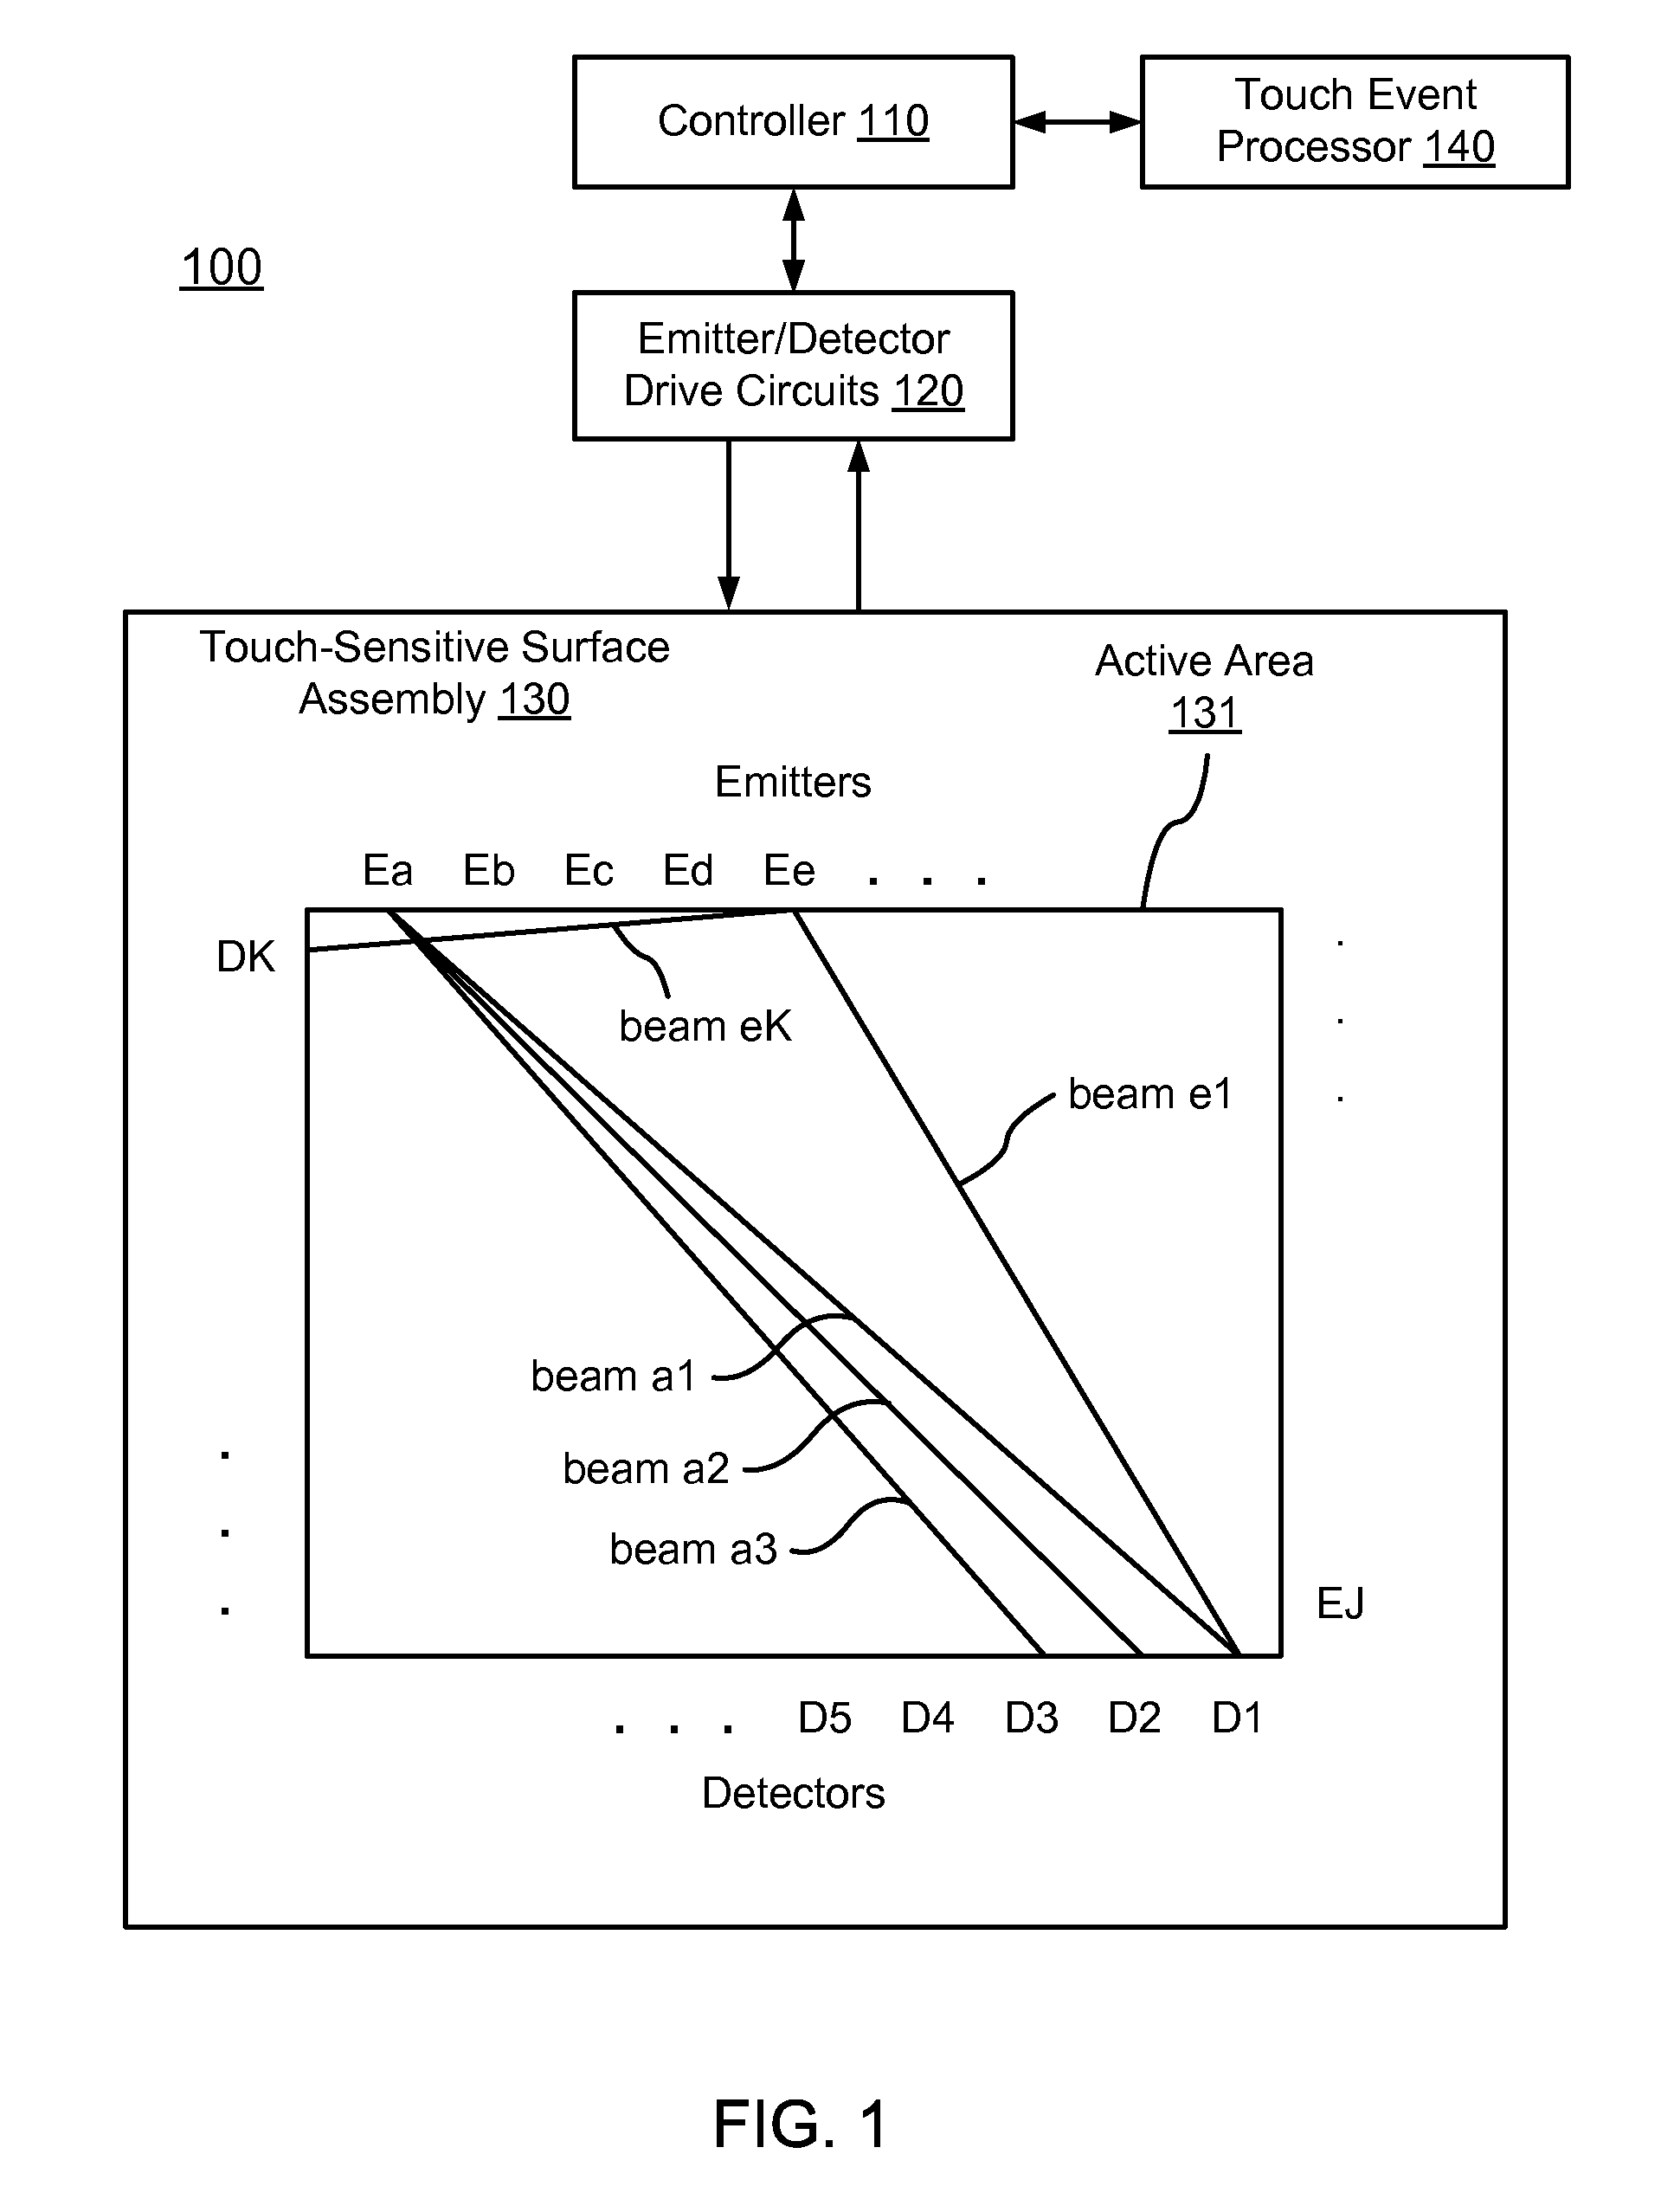 Optical coupler for use in an optical touch sensitive device